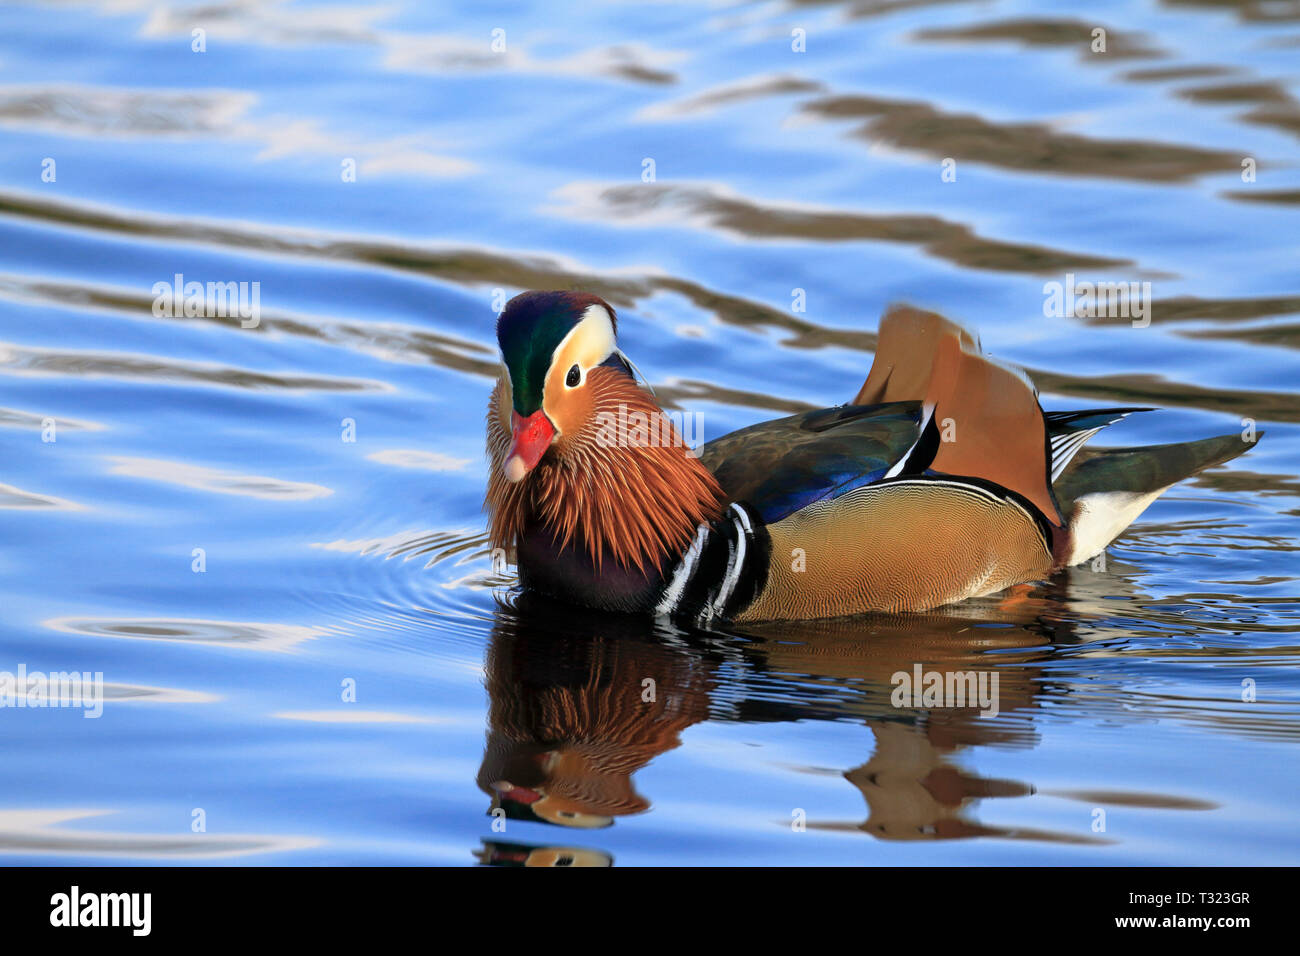 Male Mandarin duck, Aix galericulata on a lake in spring, England, UK. Stock Photo